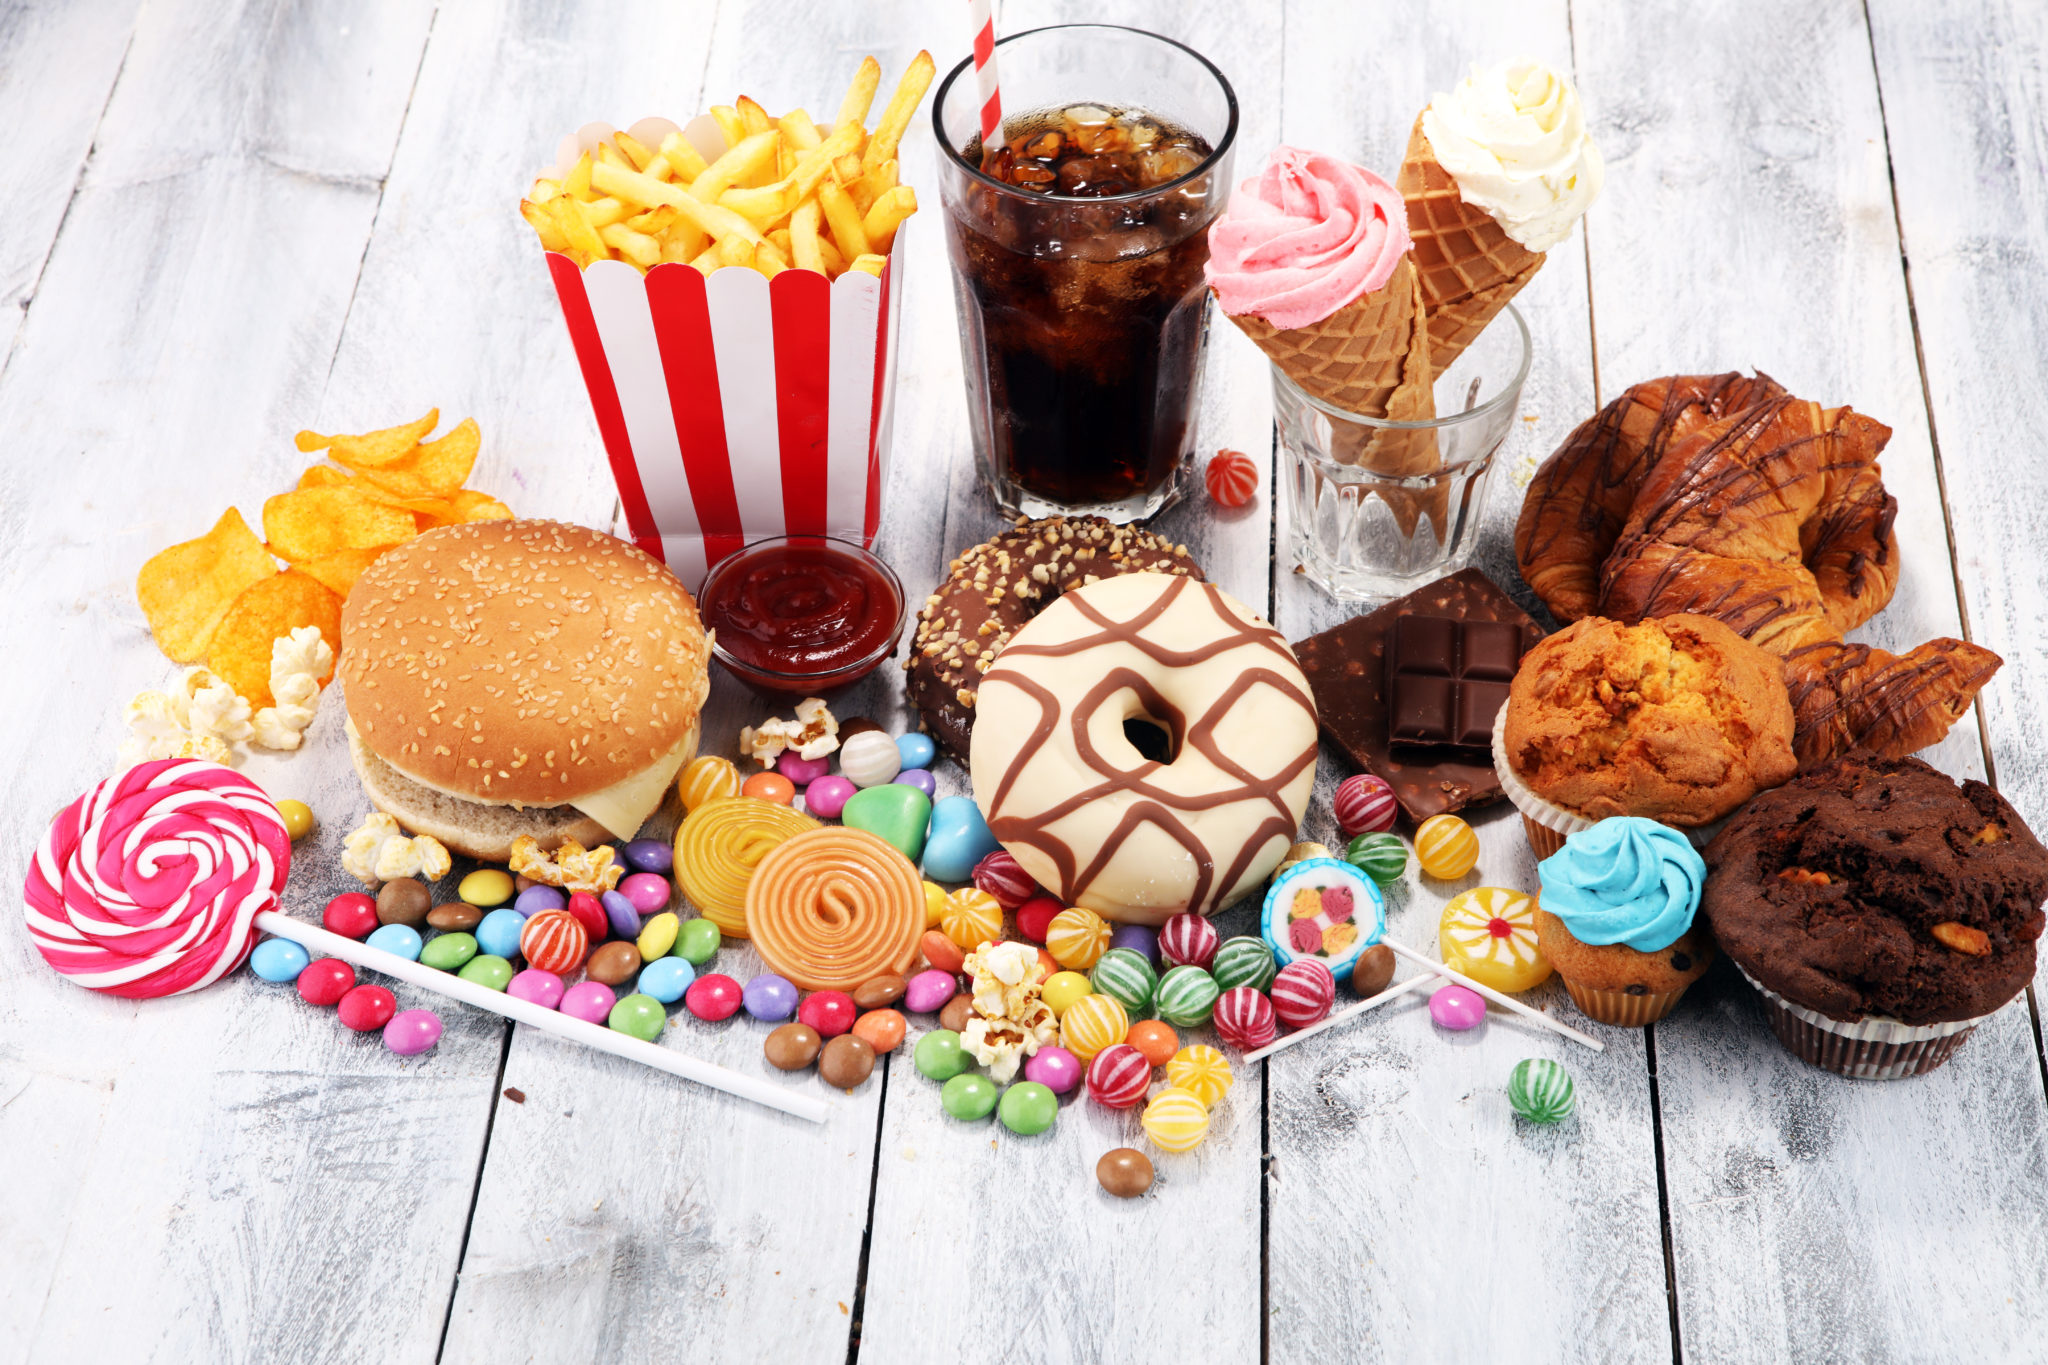 sugar addict image of unhealthy sugar filled fast carbohydrates foods